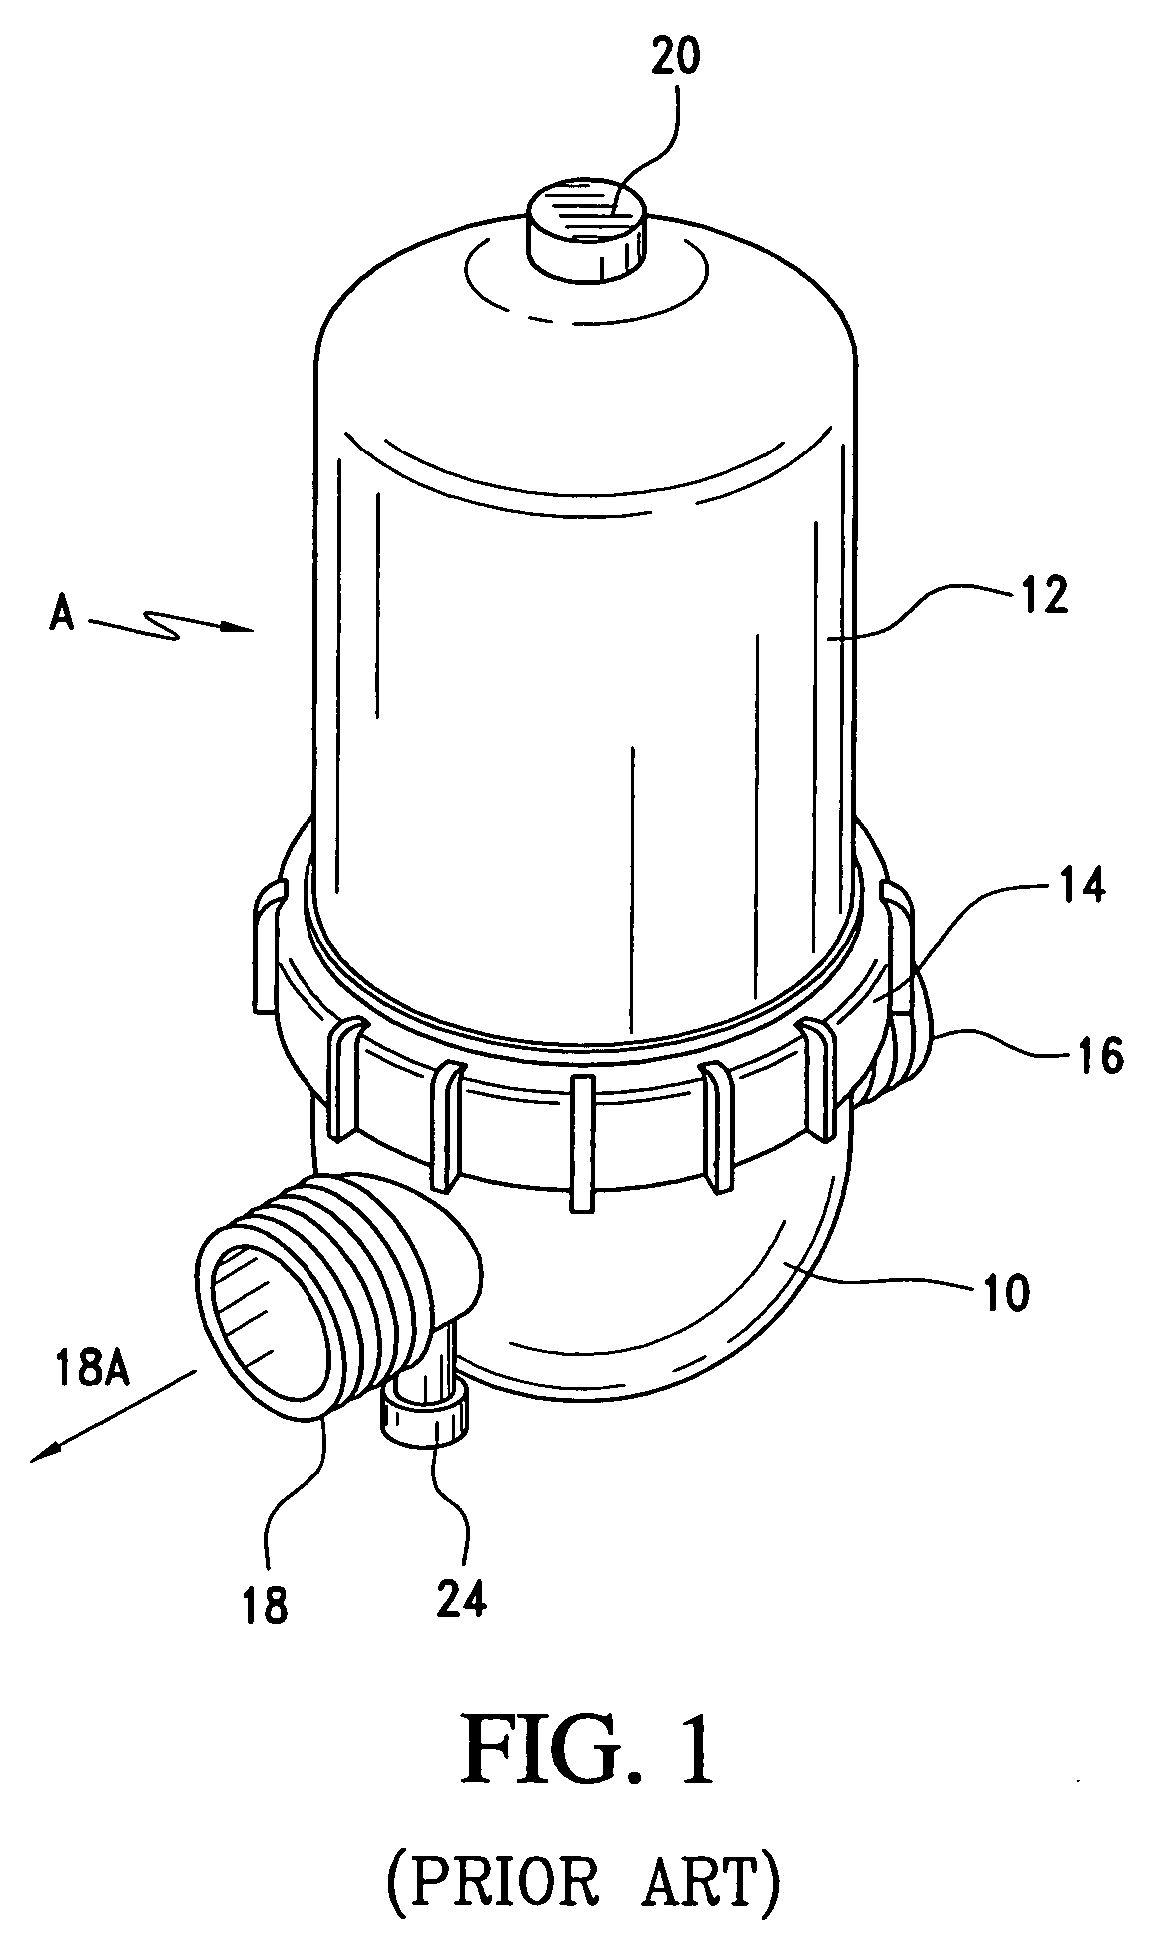 Self-cleaning filter apparatus